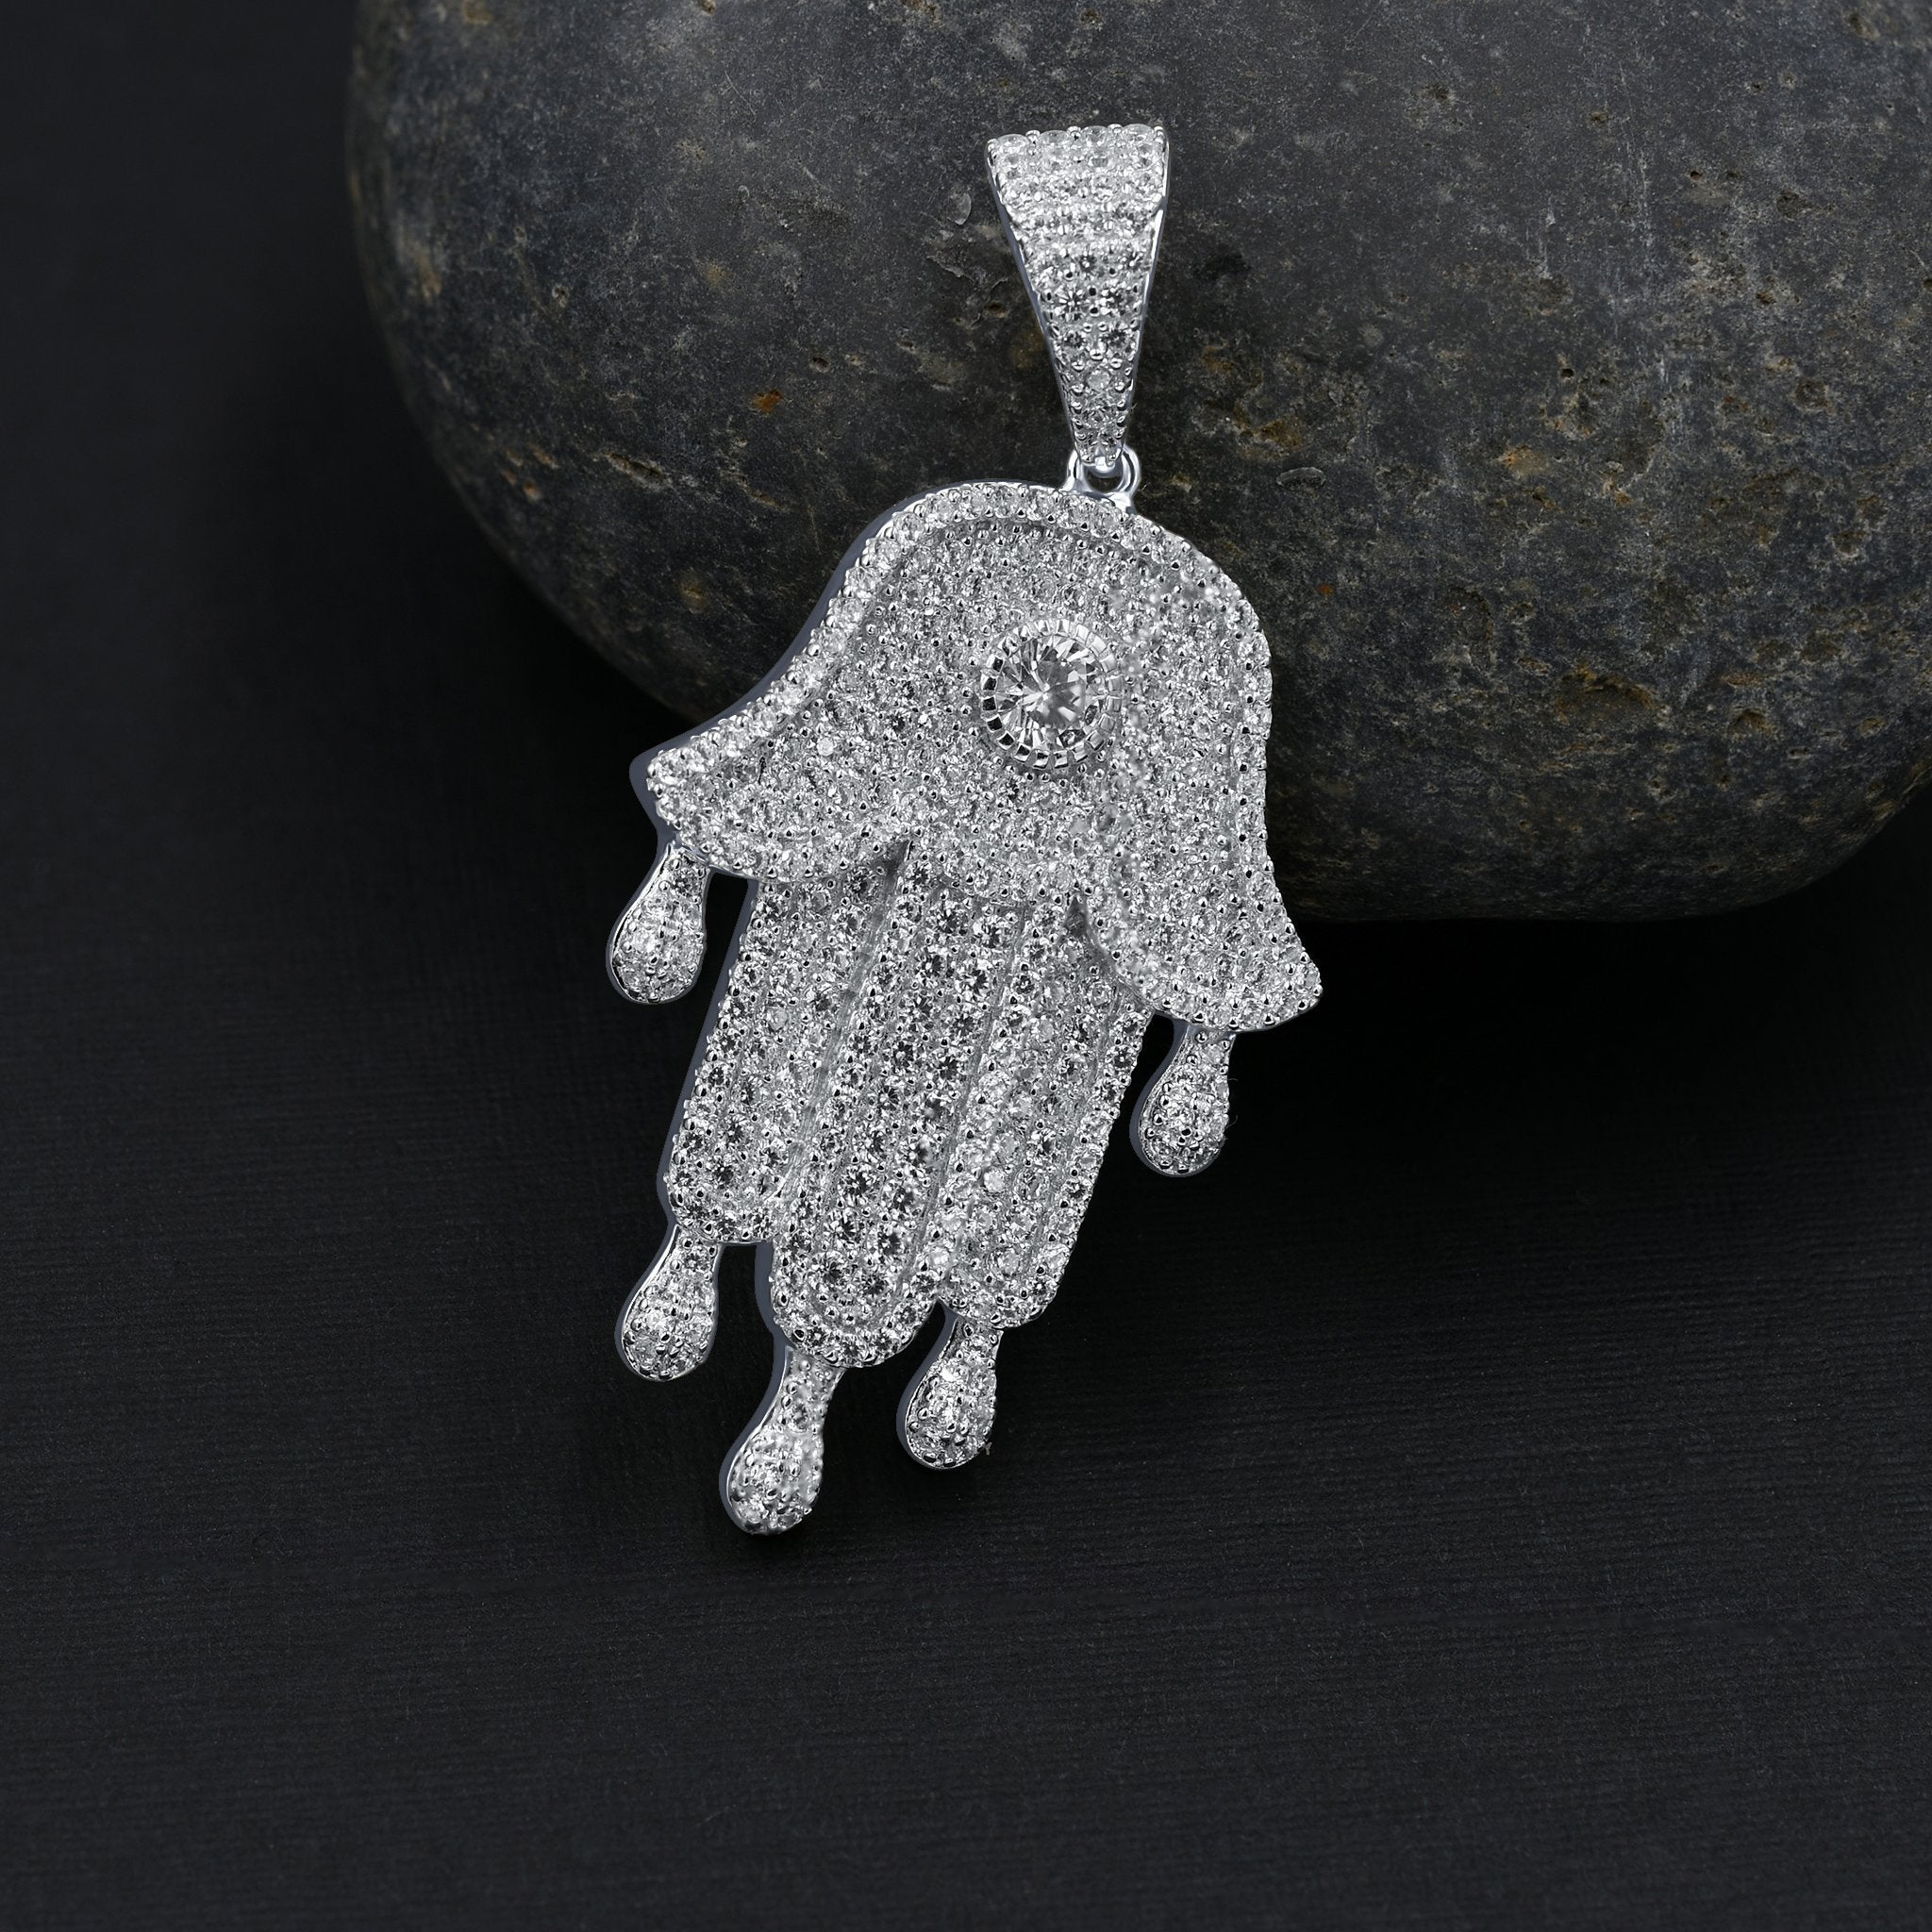 925 Silver CZ Pendant - Micropave Prongset | New Arrival
Express your culture with this 925 silver pendant featuring high-quality cubic zirconia stones. The prong setting ensures durability and a stunning micropave finish. At 44mm length and Bijou Her